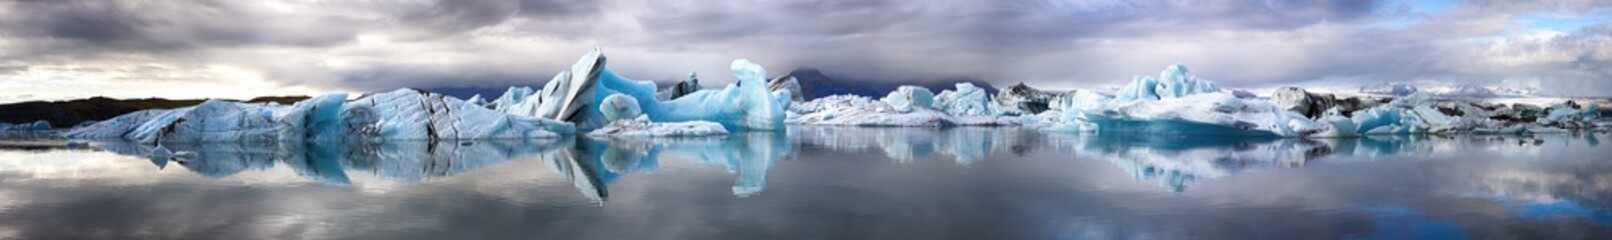 Ultra wide panorama of the Jokulsarlon Glacial lagoon, Southern Iceland. Mirror reflection of the blue ice icebergs.